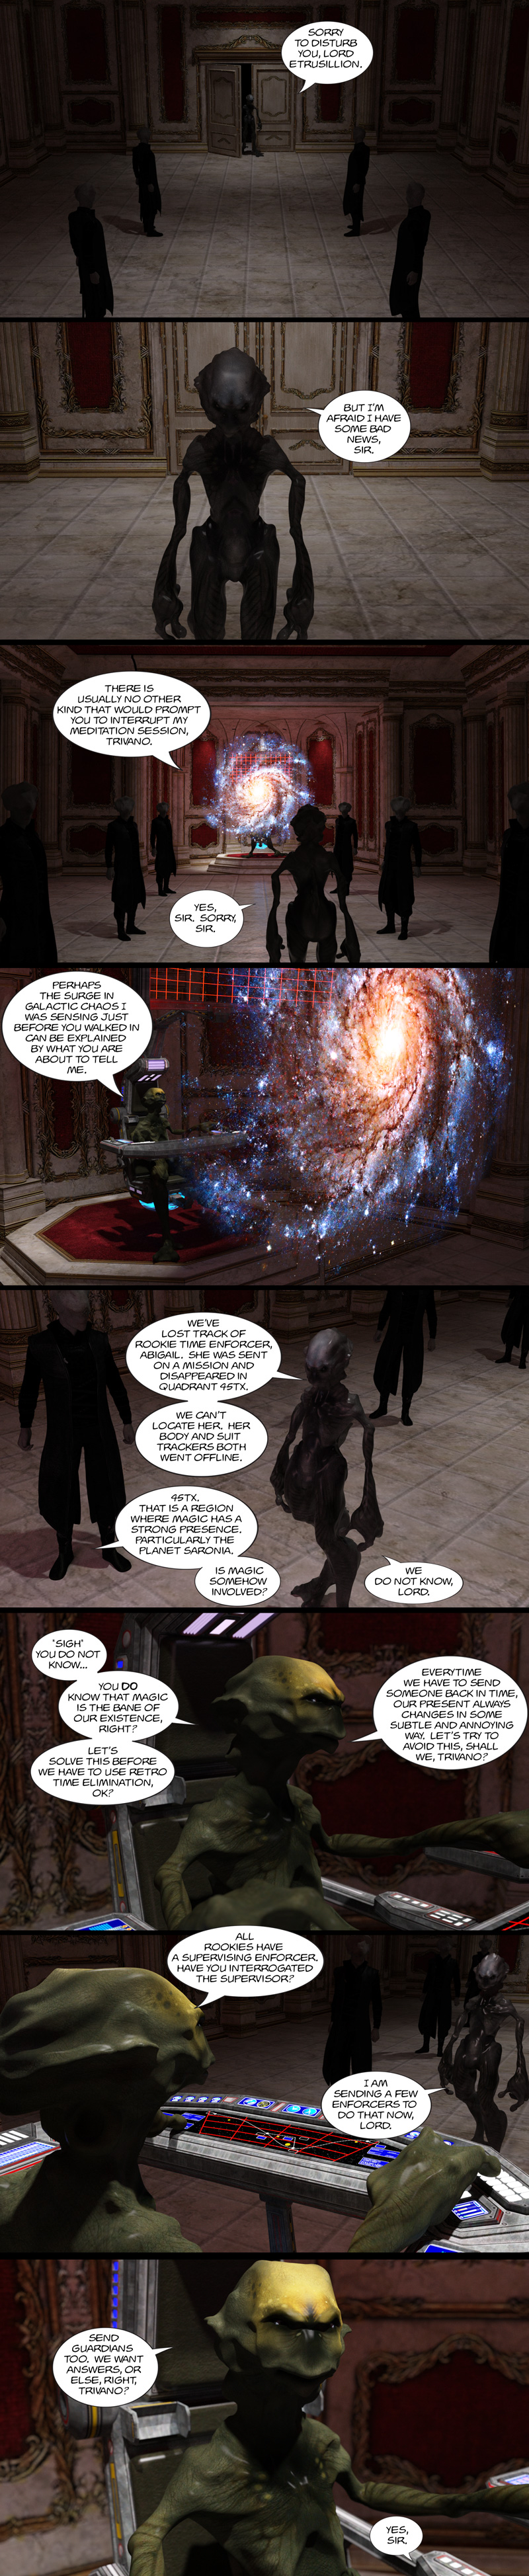 Chapter 13, page 24 – Lord Etrusillion, Abby’s missing